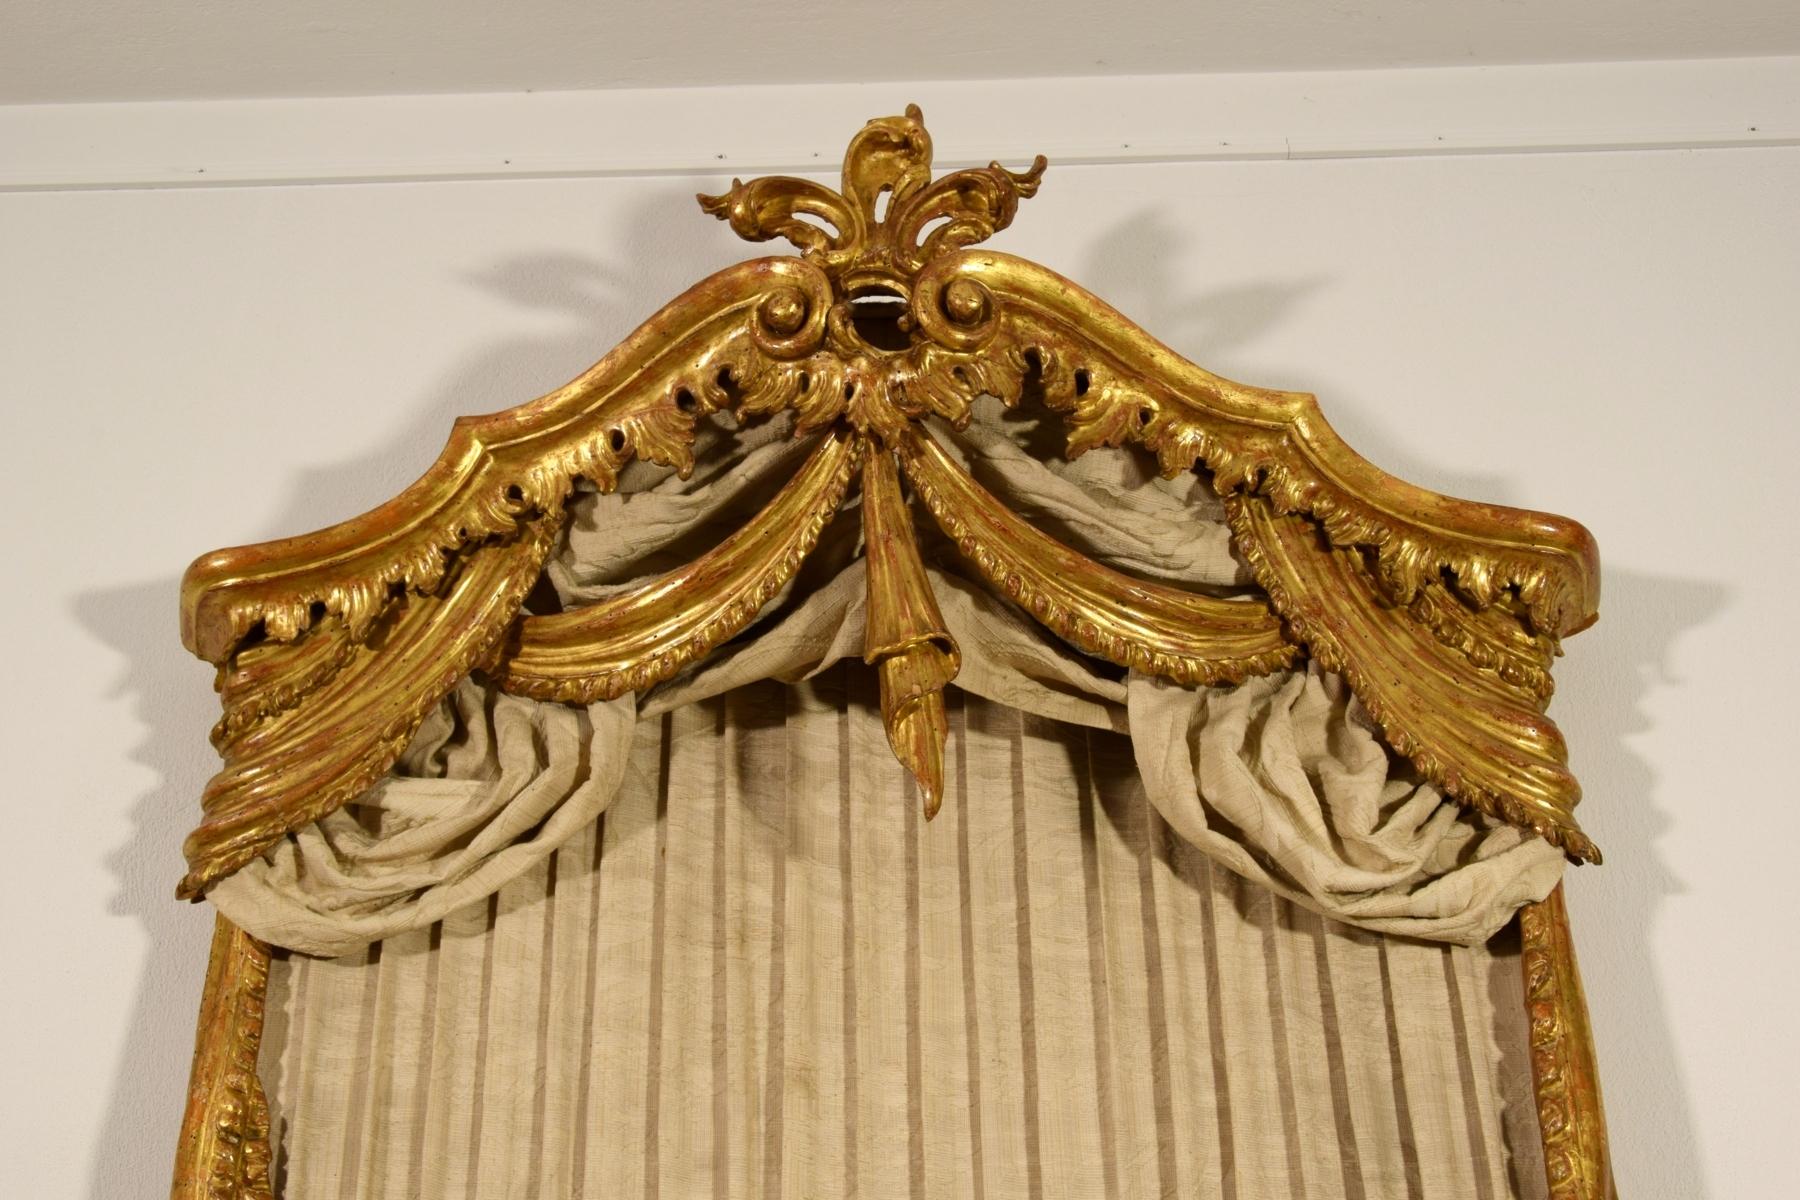 Hand-Carved 20th Century Italian Carved and Gilded Wood Canopy Bed Head